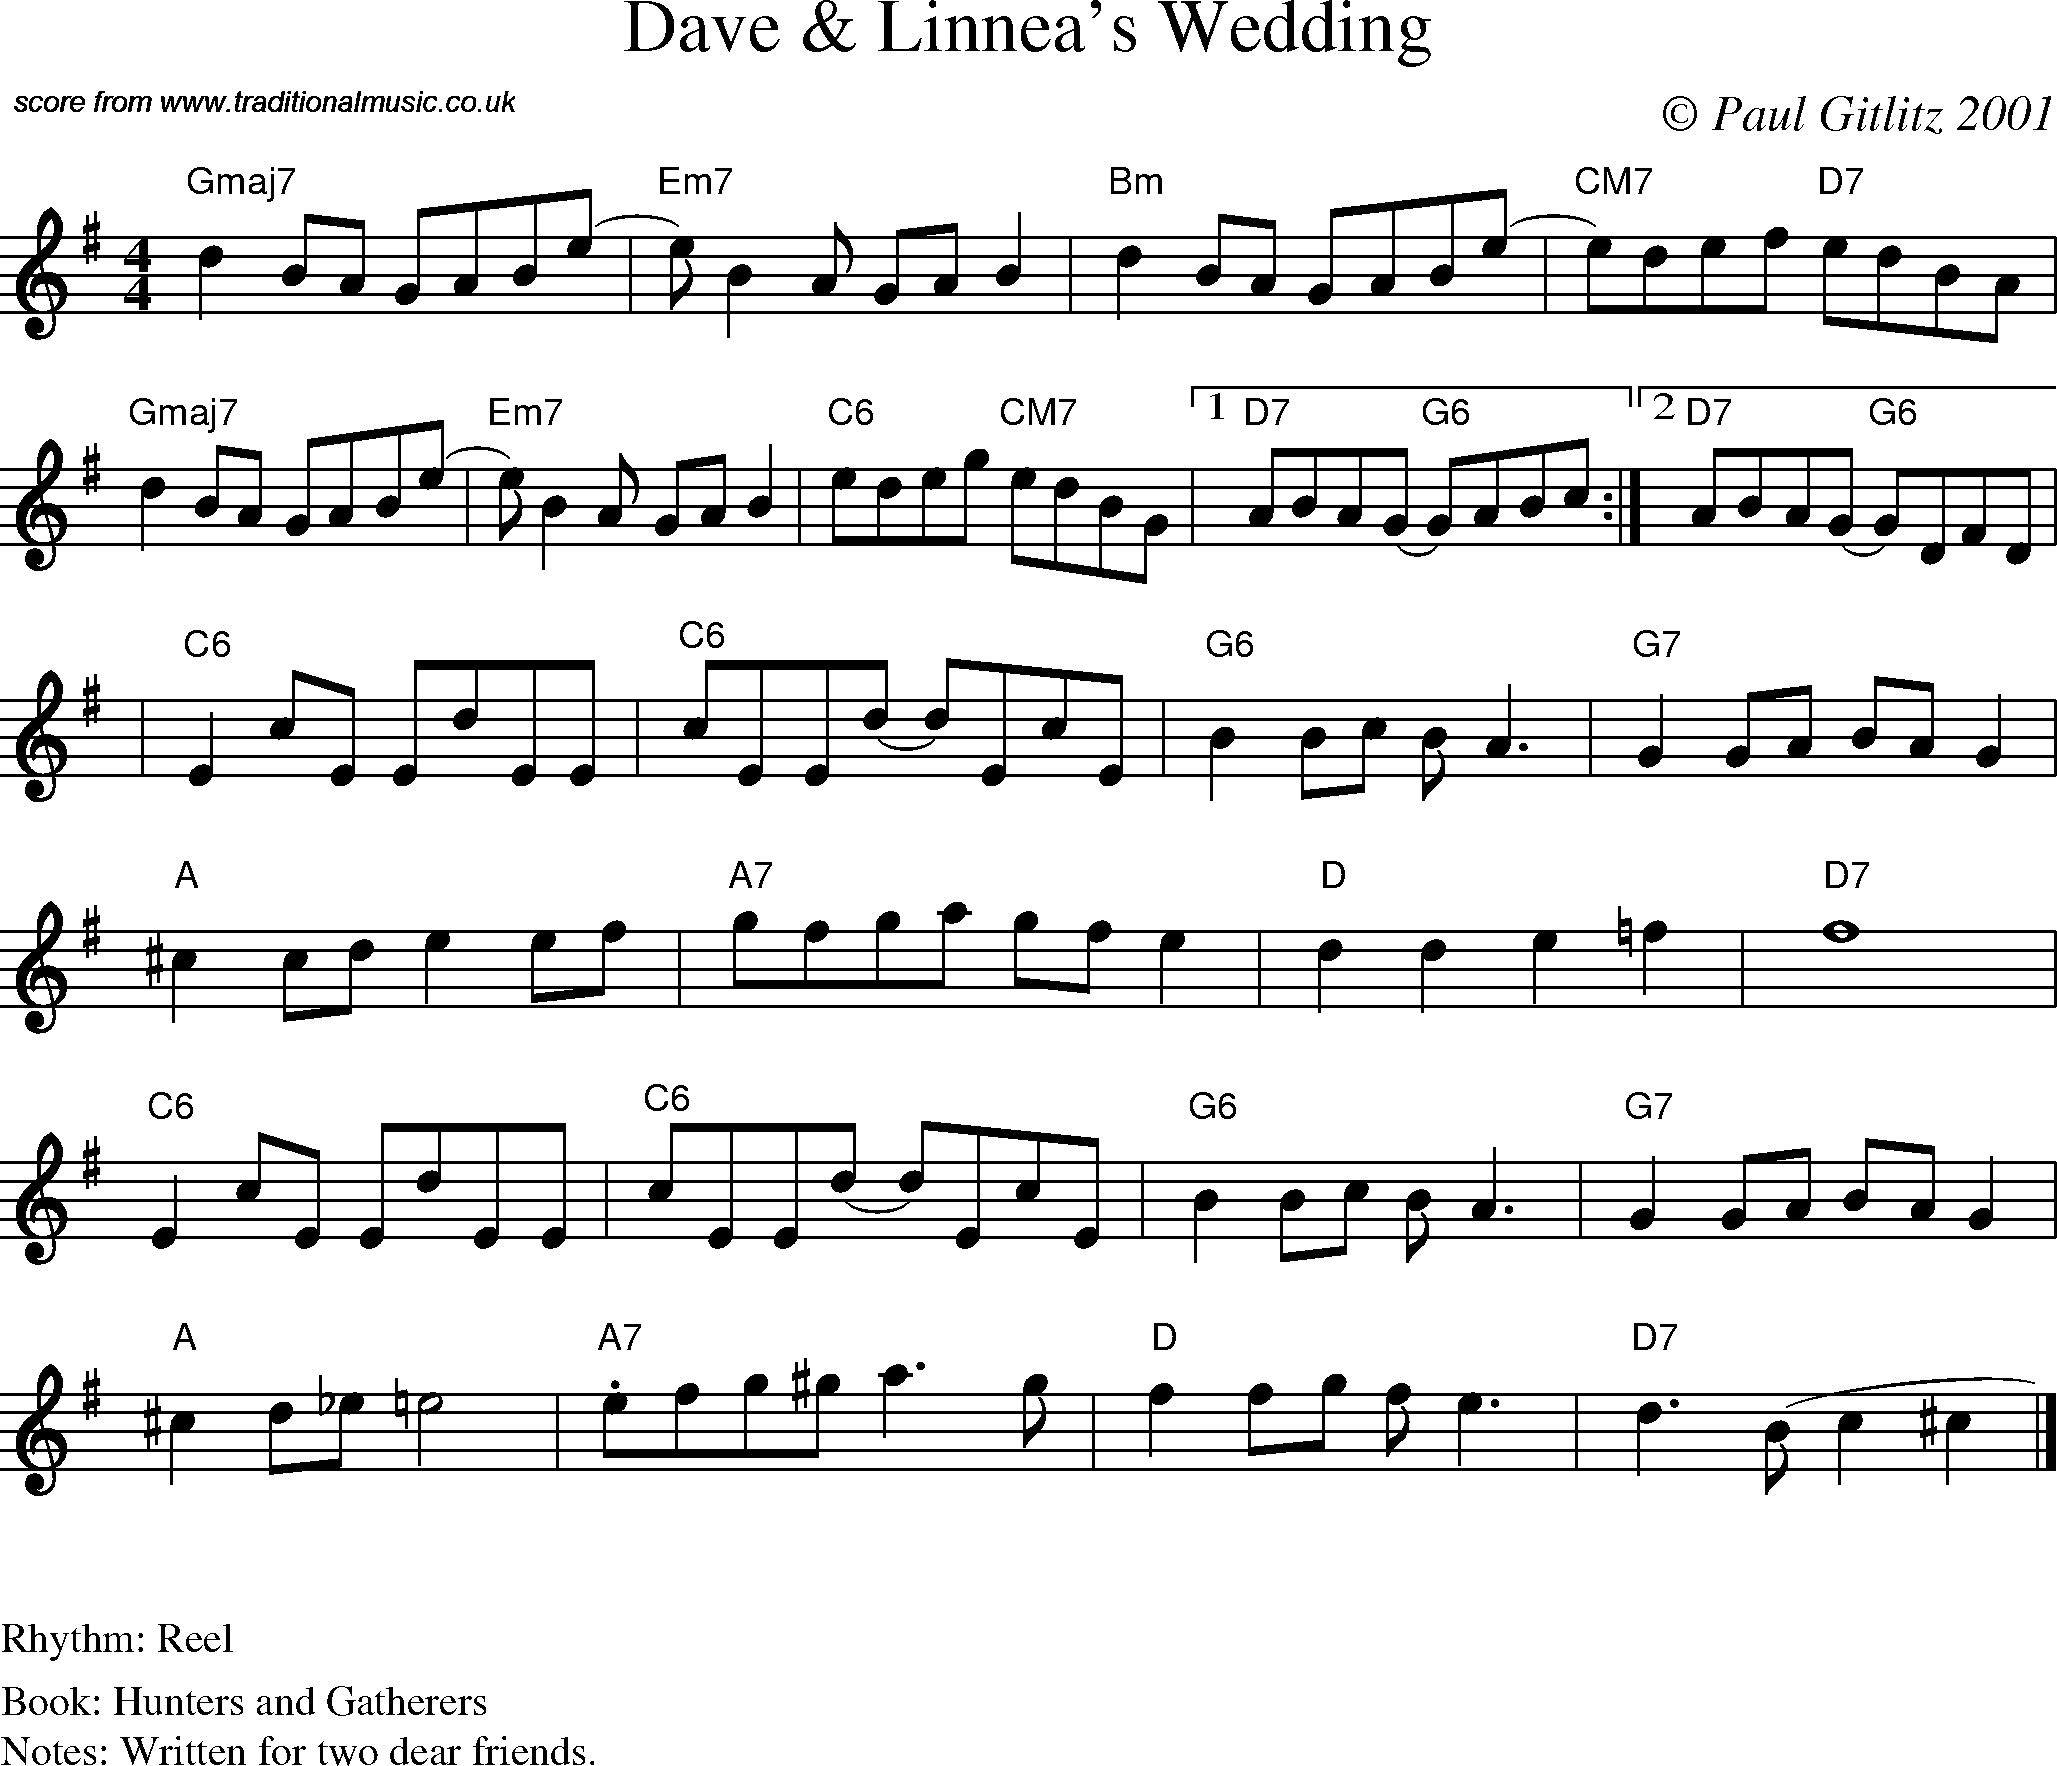 Sheet Music Score for Reel - Dave and Linnea's Wedding